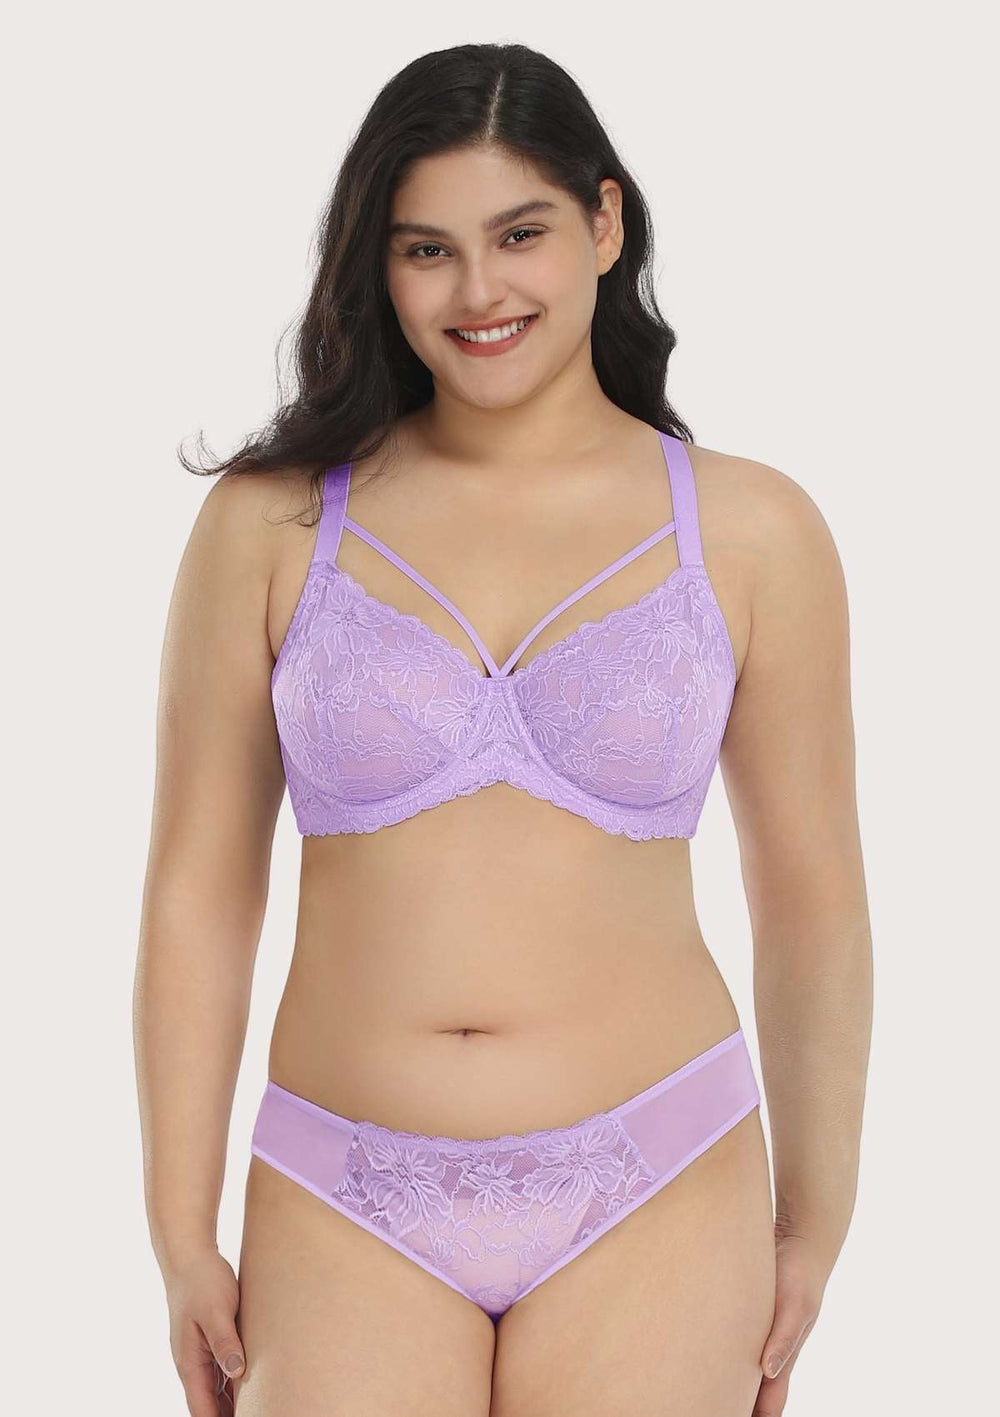 36B Strappy Bra and Brief Panty Set -  Canada